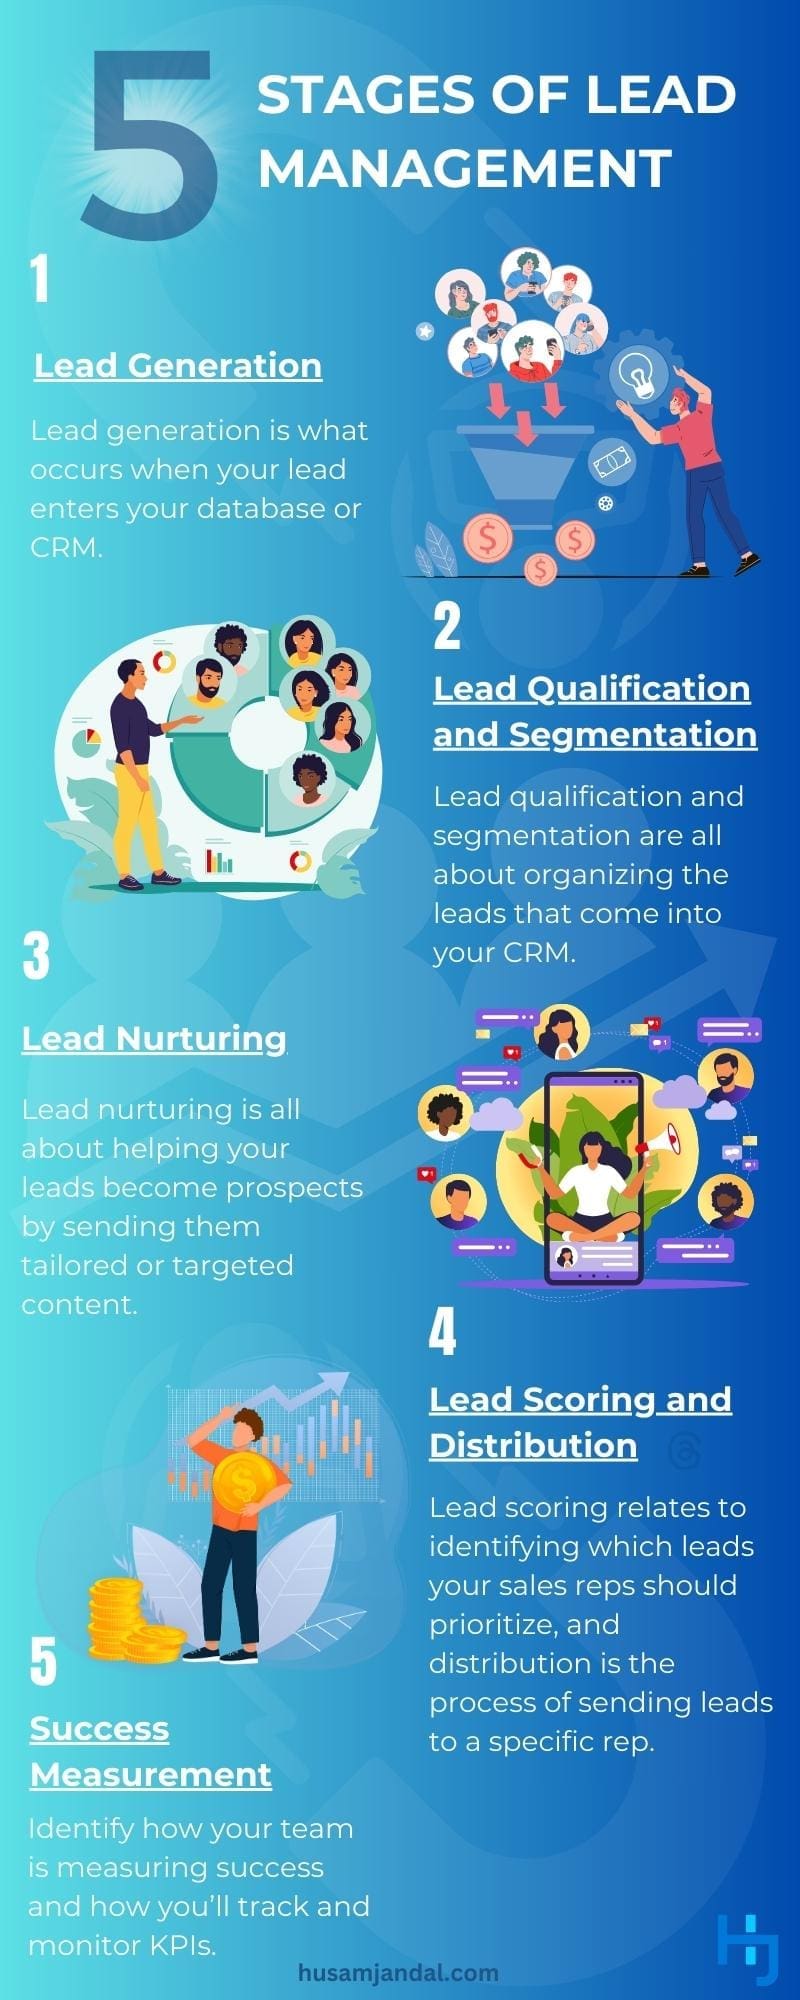 The 5 Stages of Lead Management